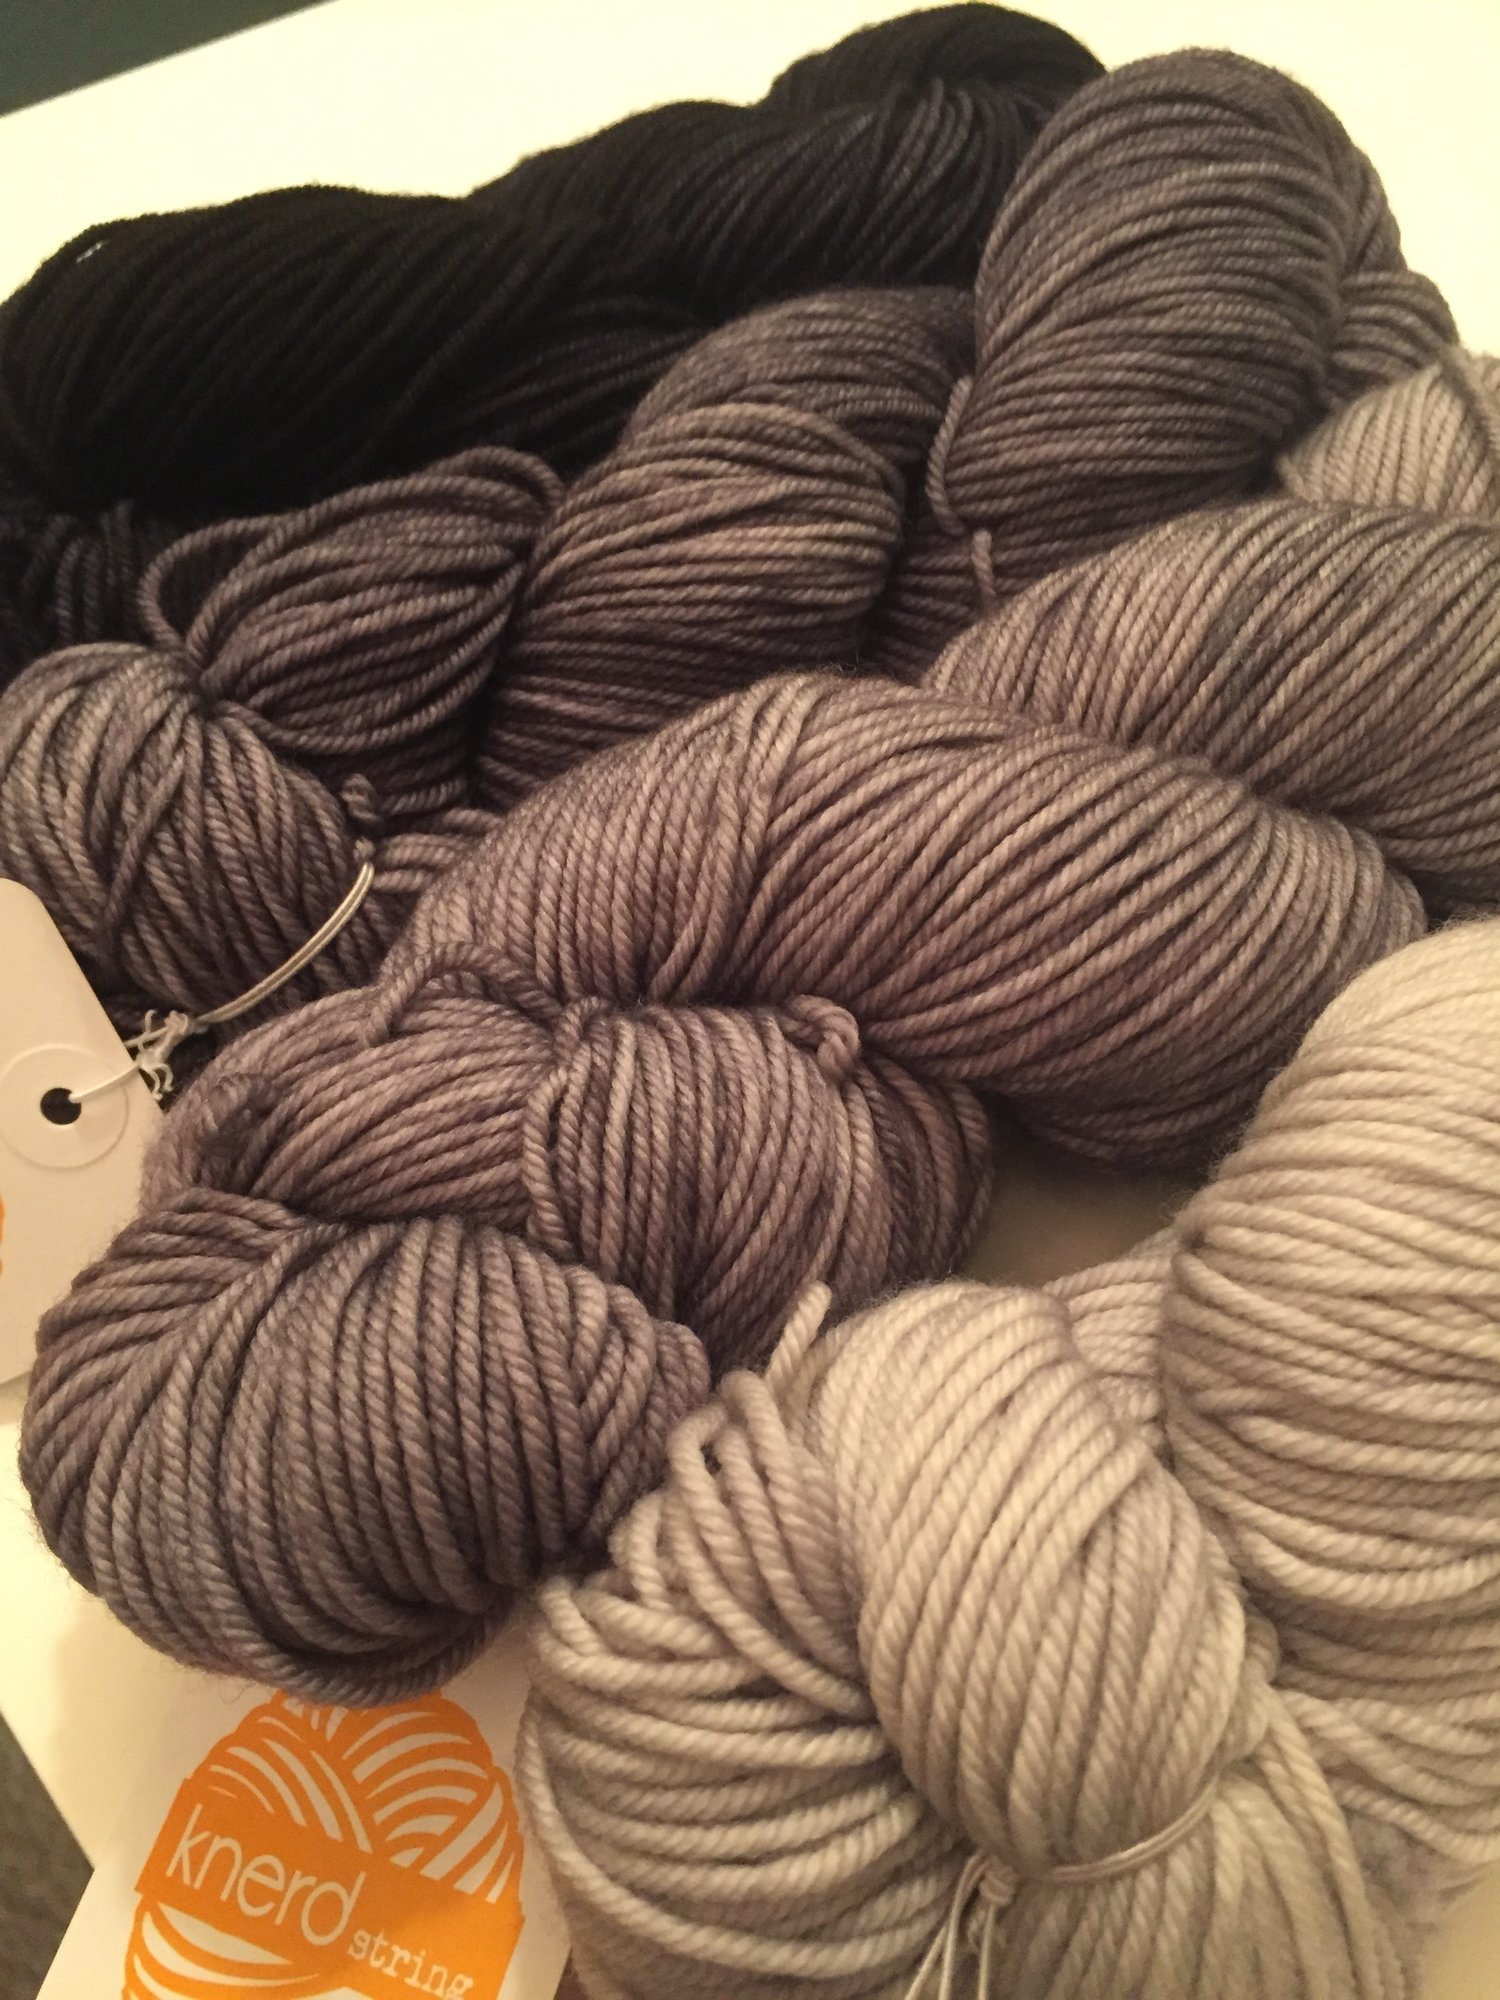 Knit Actually Podcast Episode 42